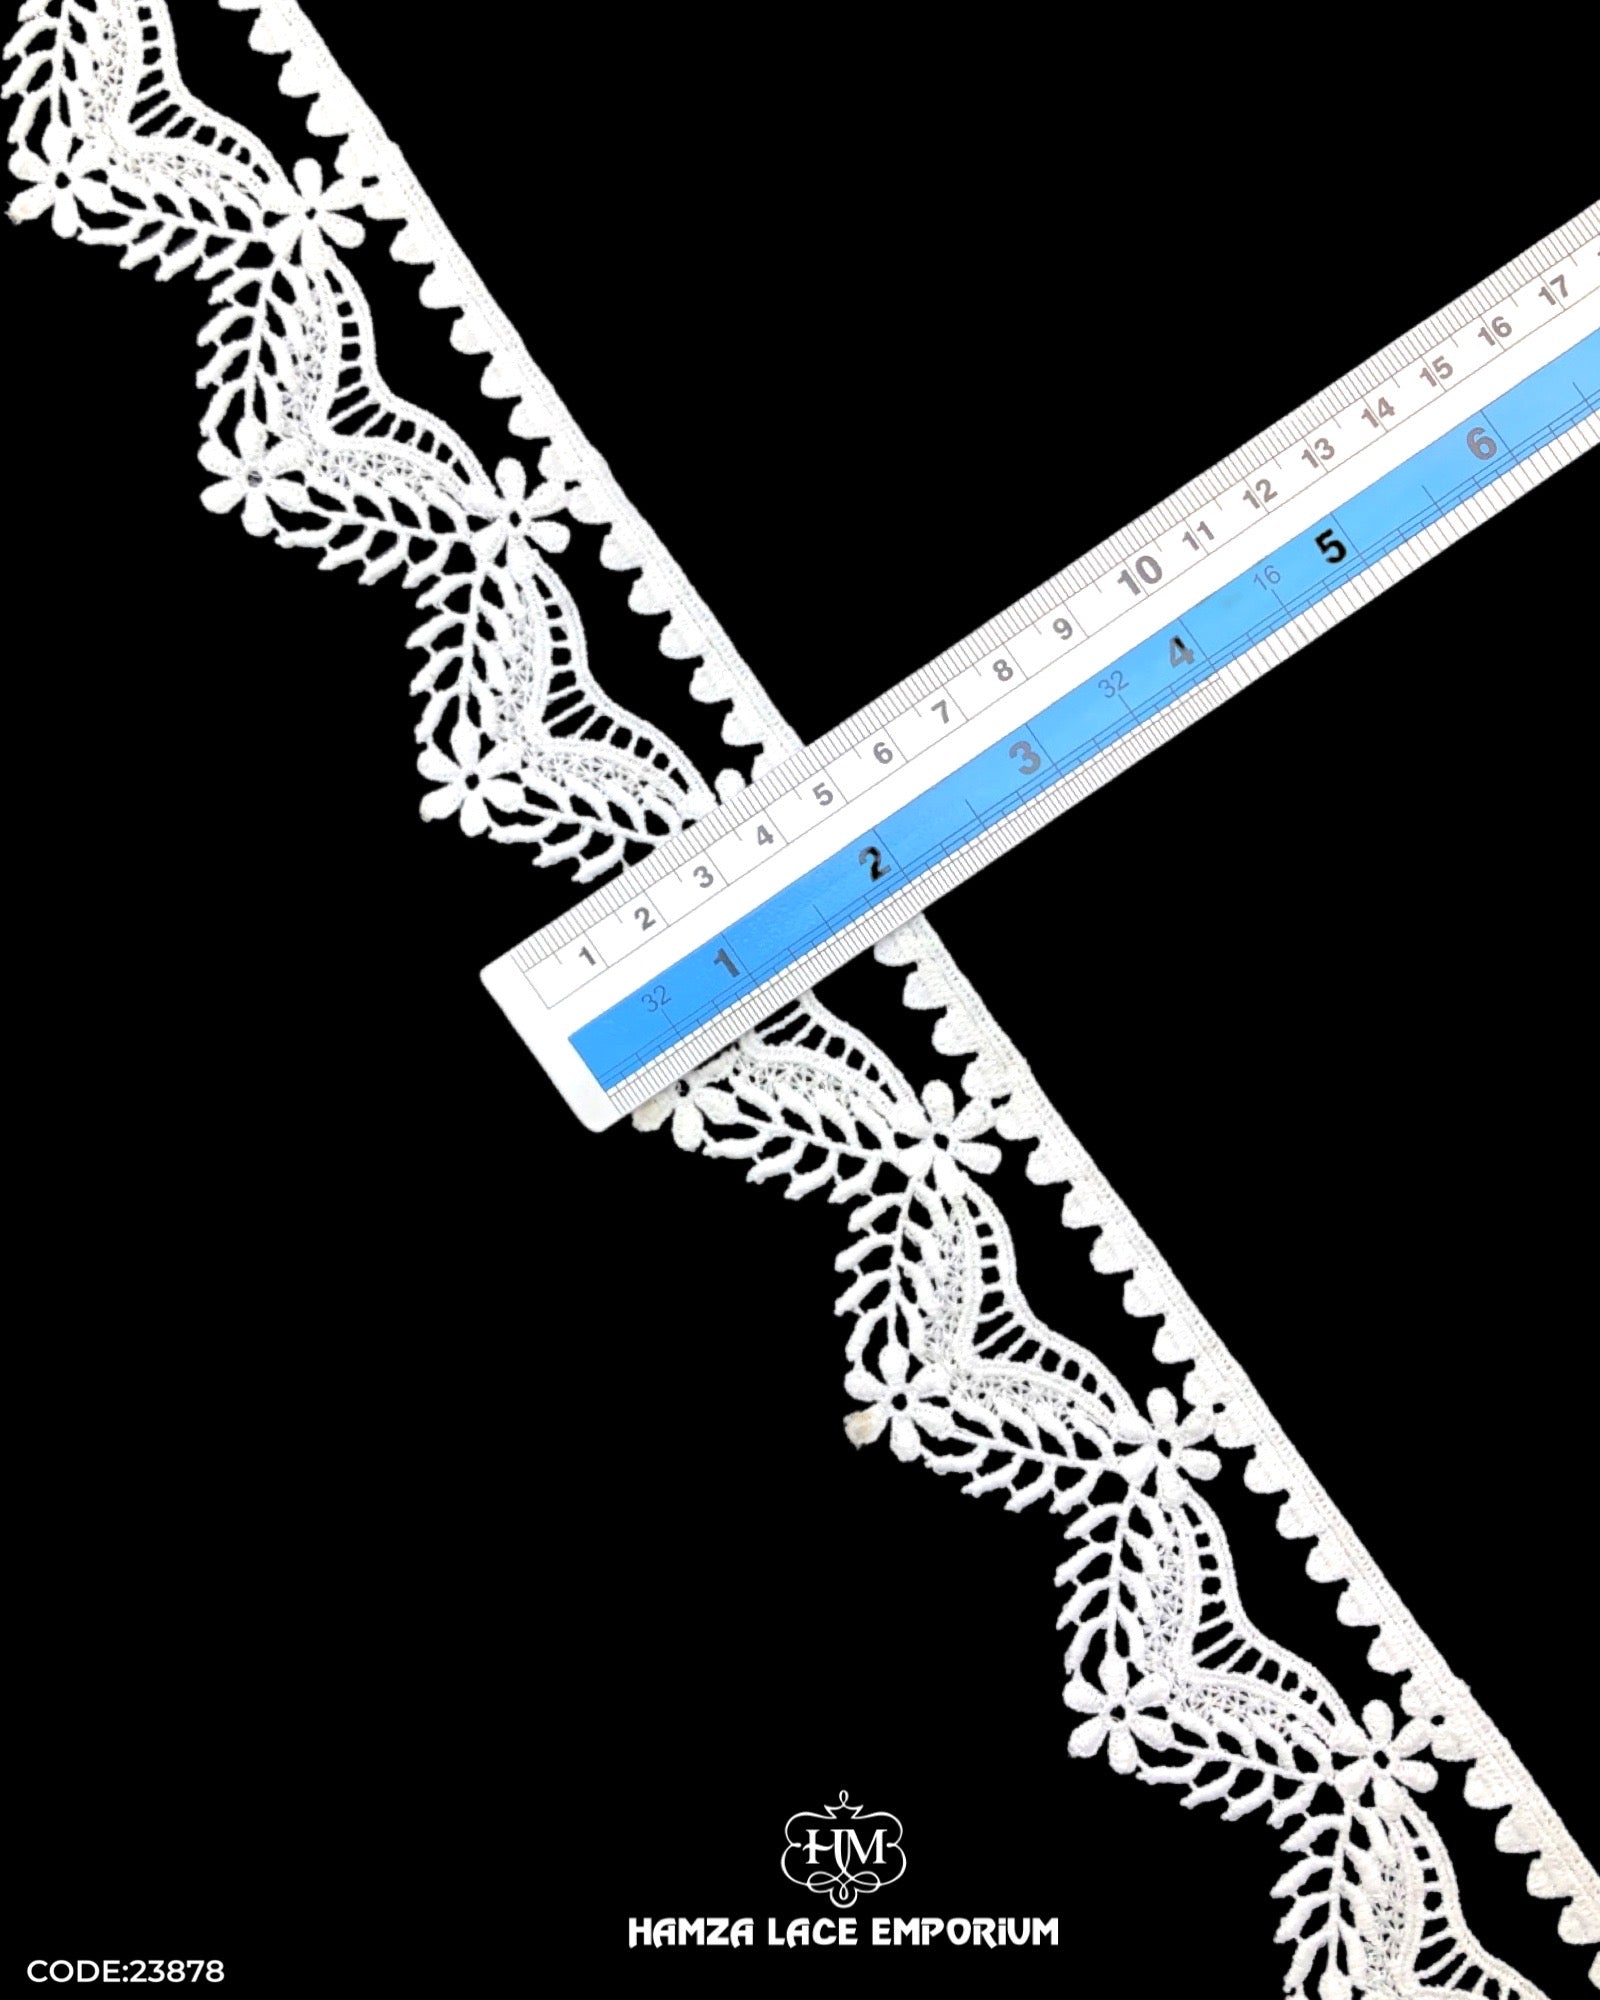 Size of the 'Edging Lace 23878' is shown as '2' inches with the help of a ruler